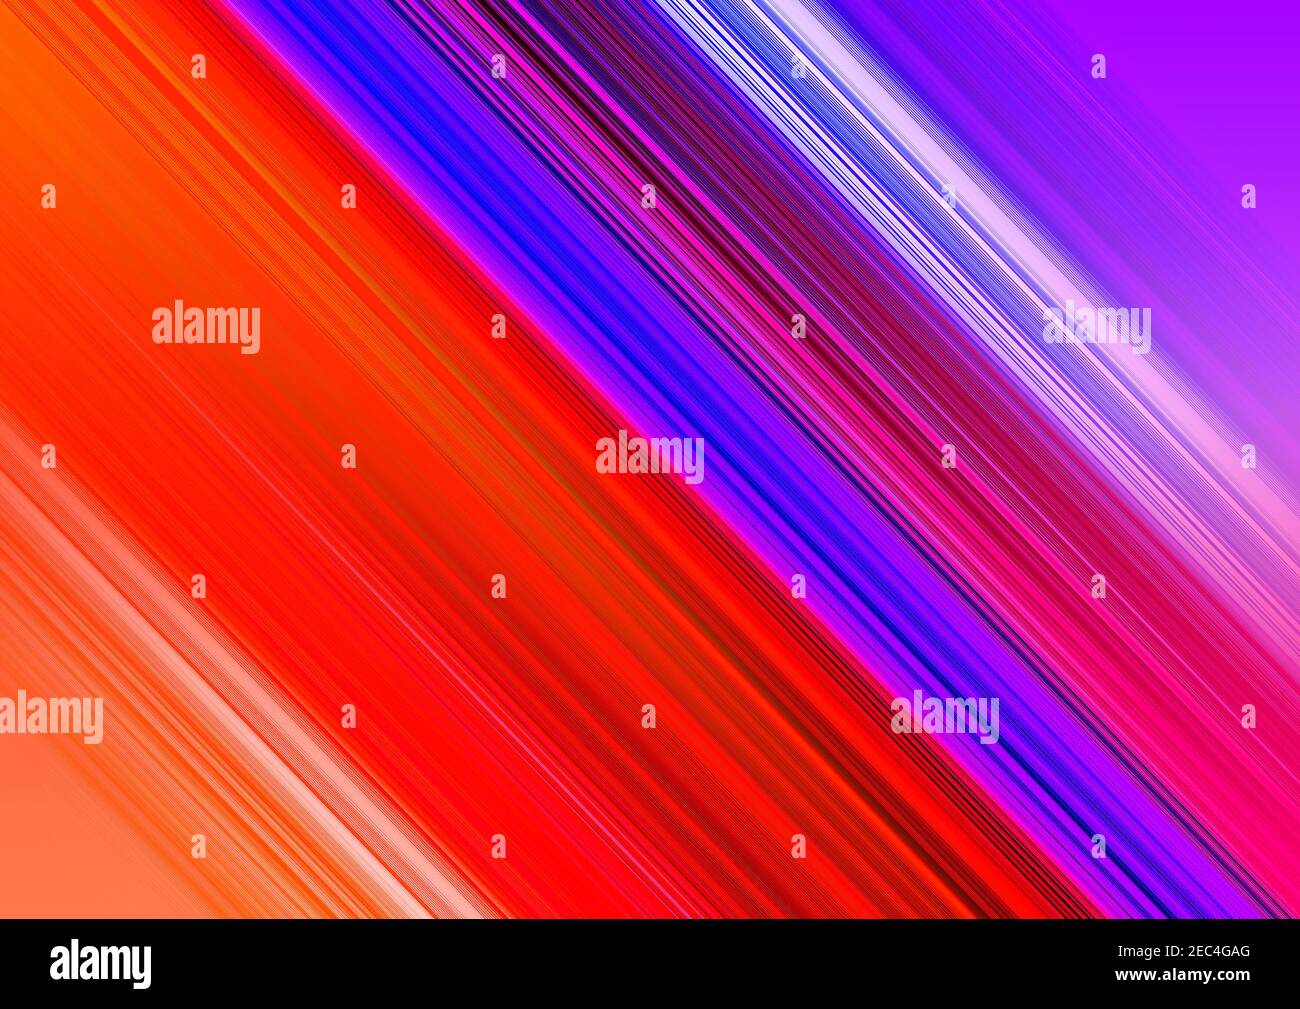 blue purple pink red orange white motion blur abstract background Stock Photo